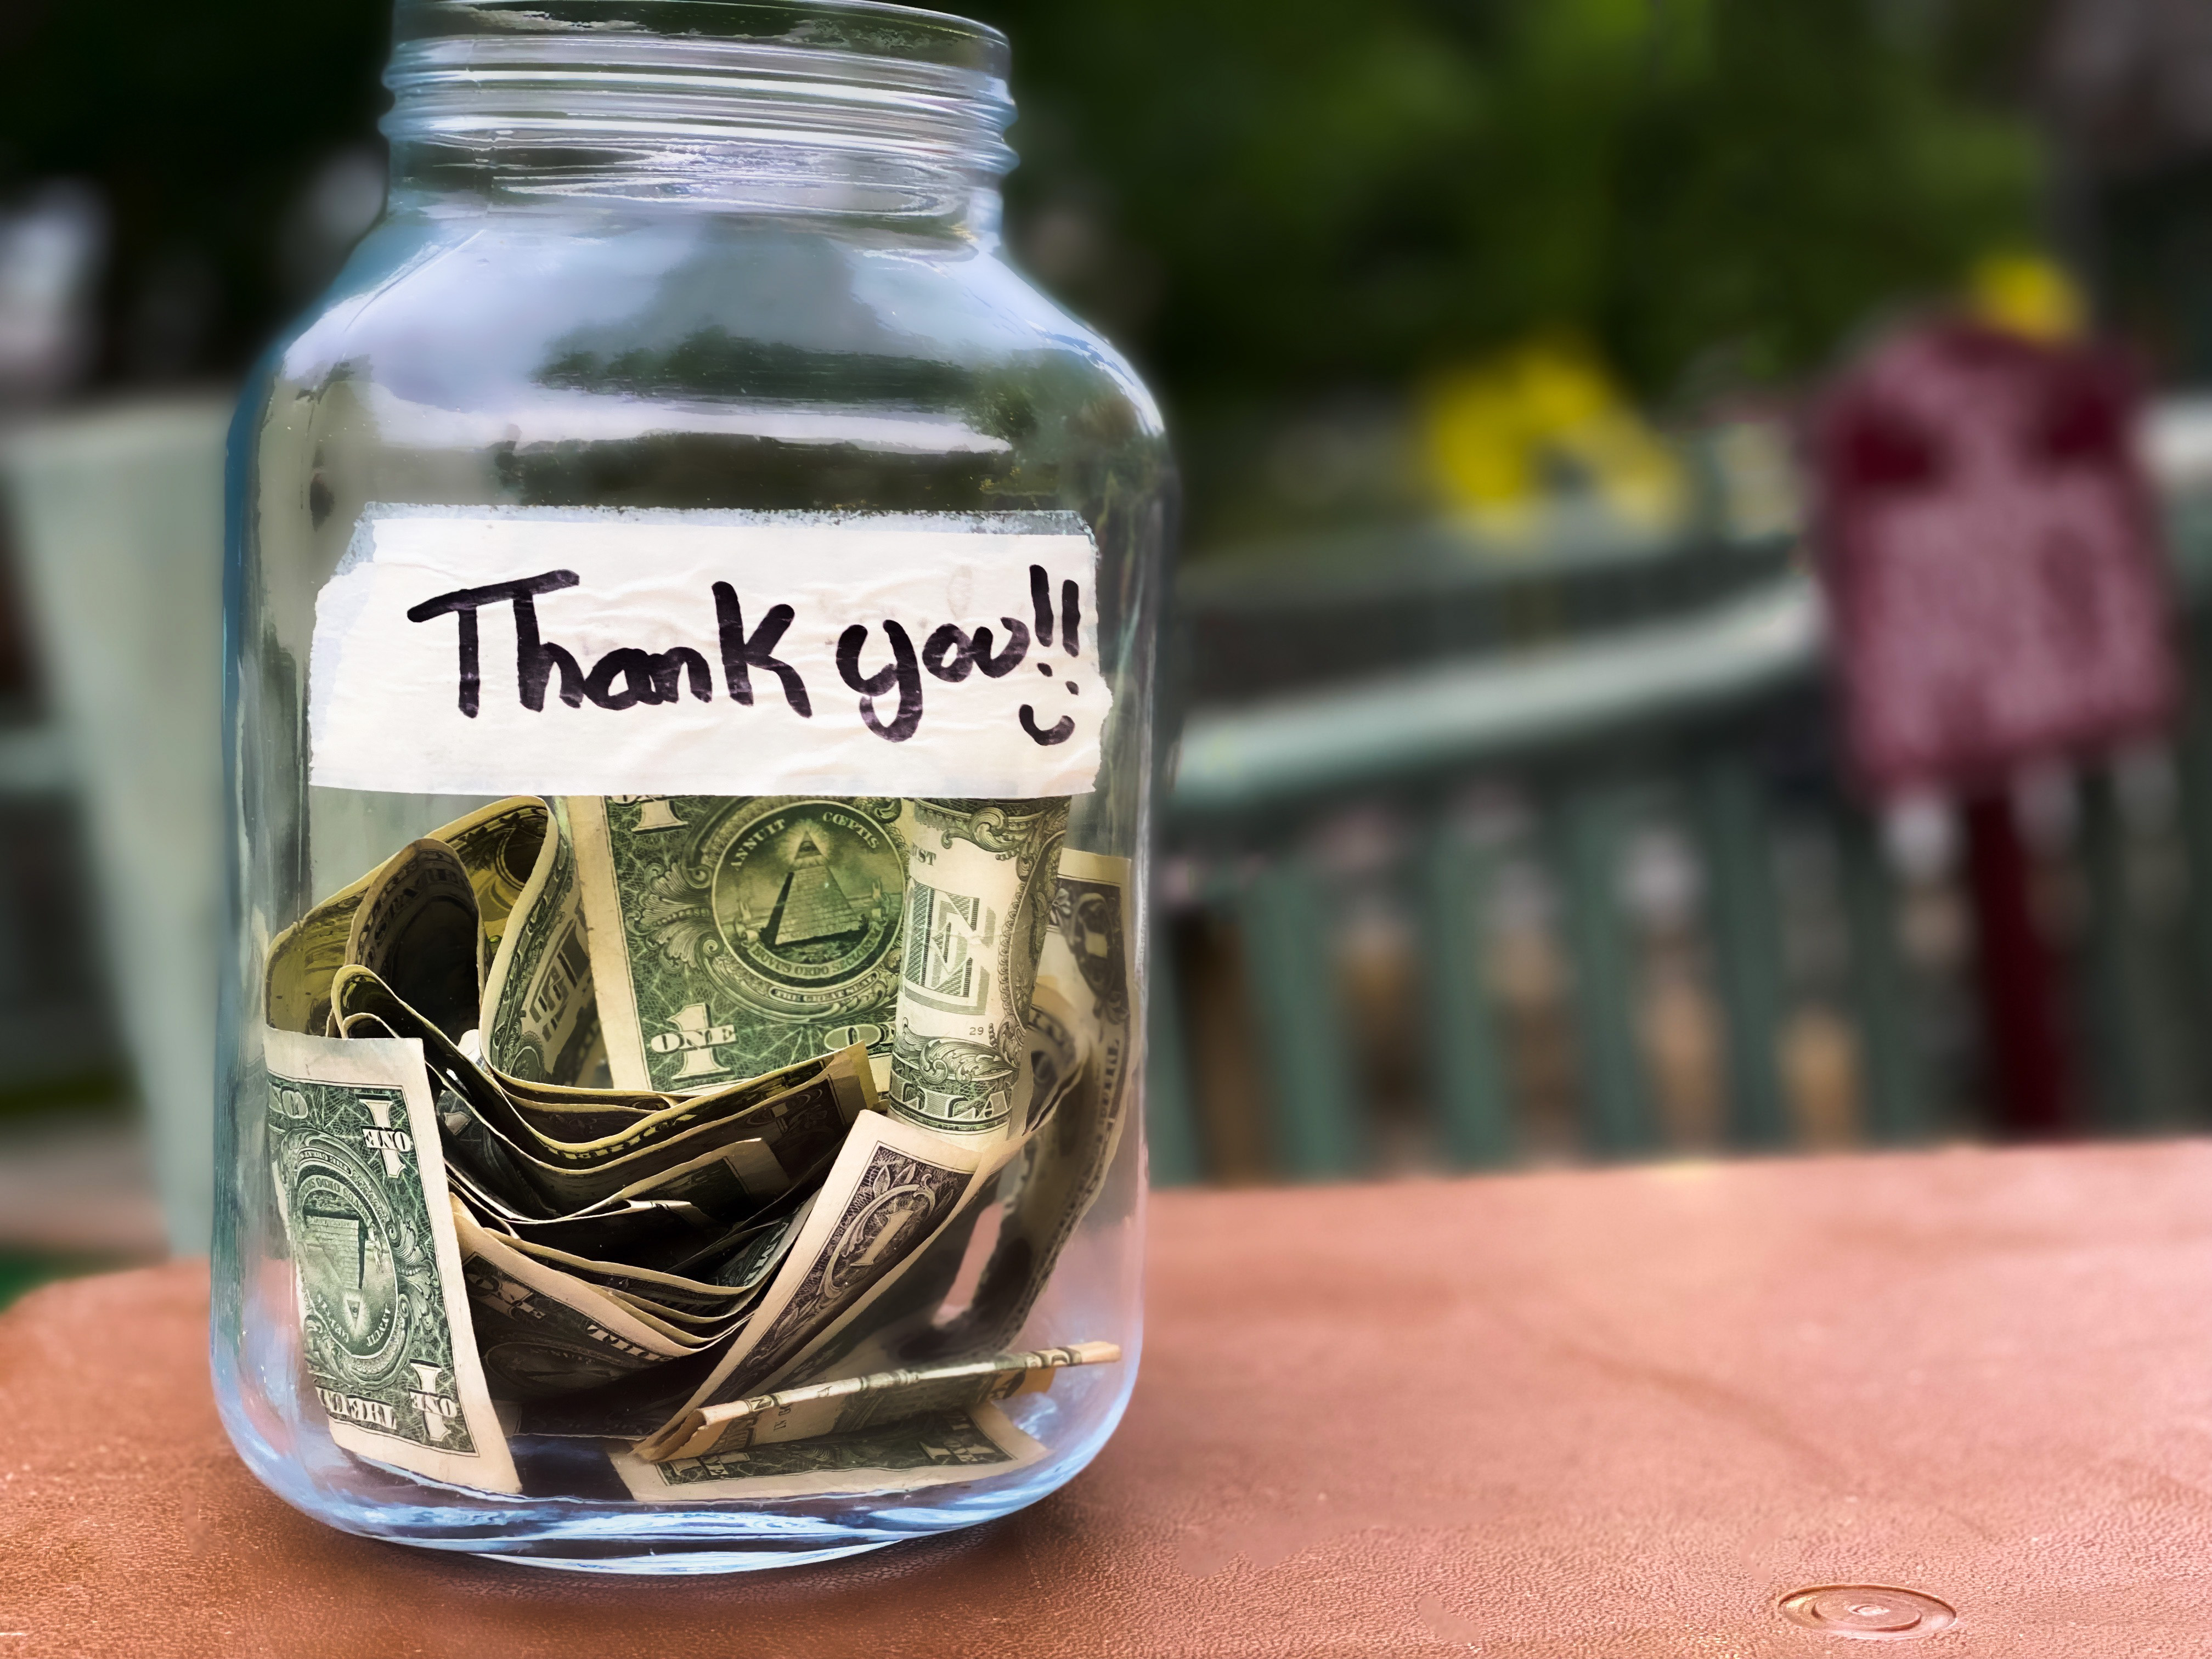 A jar of tips with a piece of tape with thank you written on it sitting on a pink countertop.